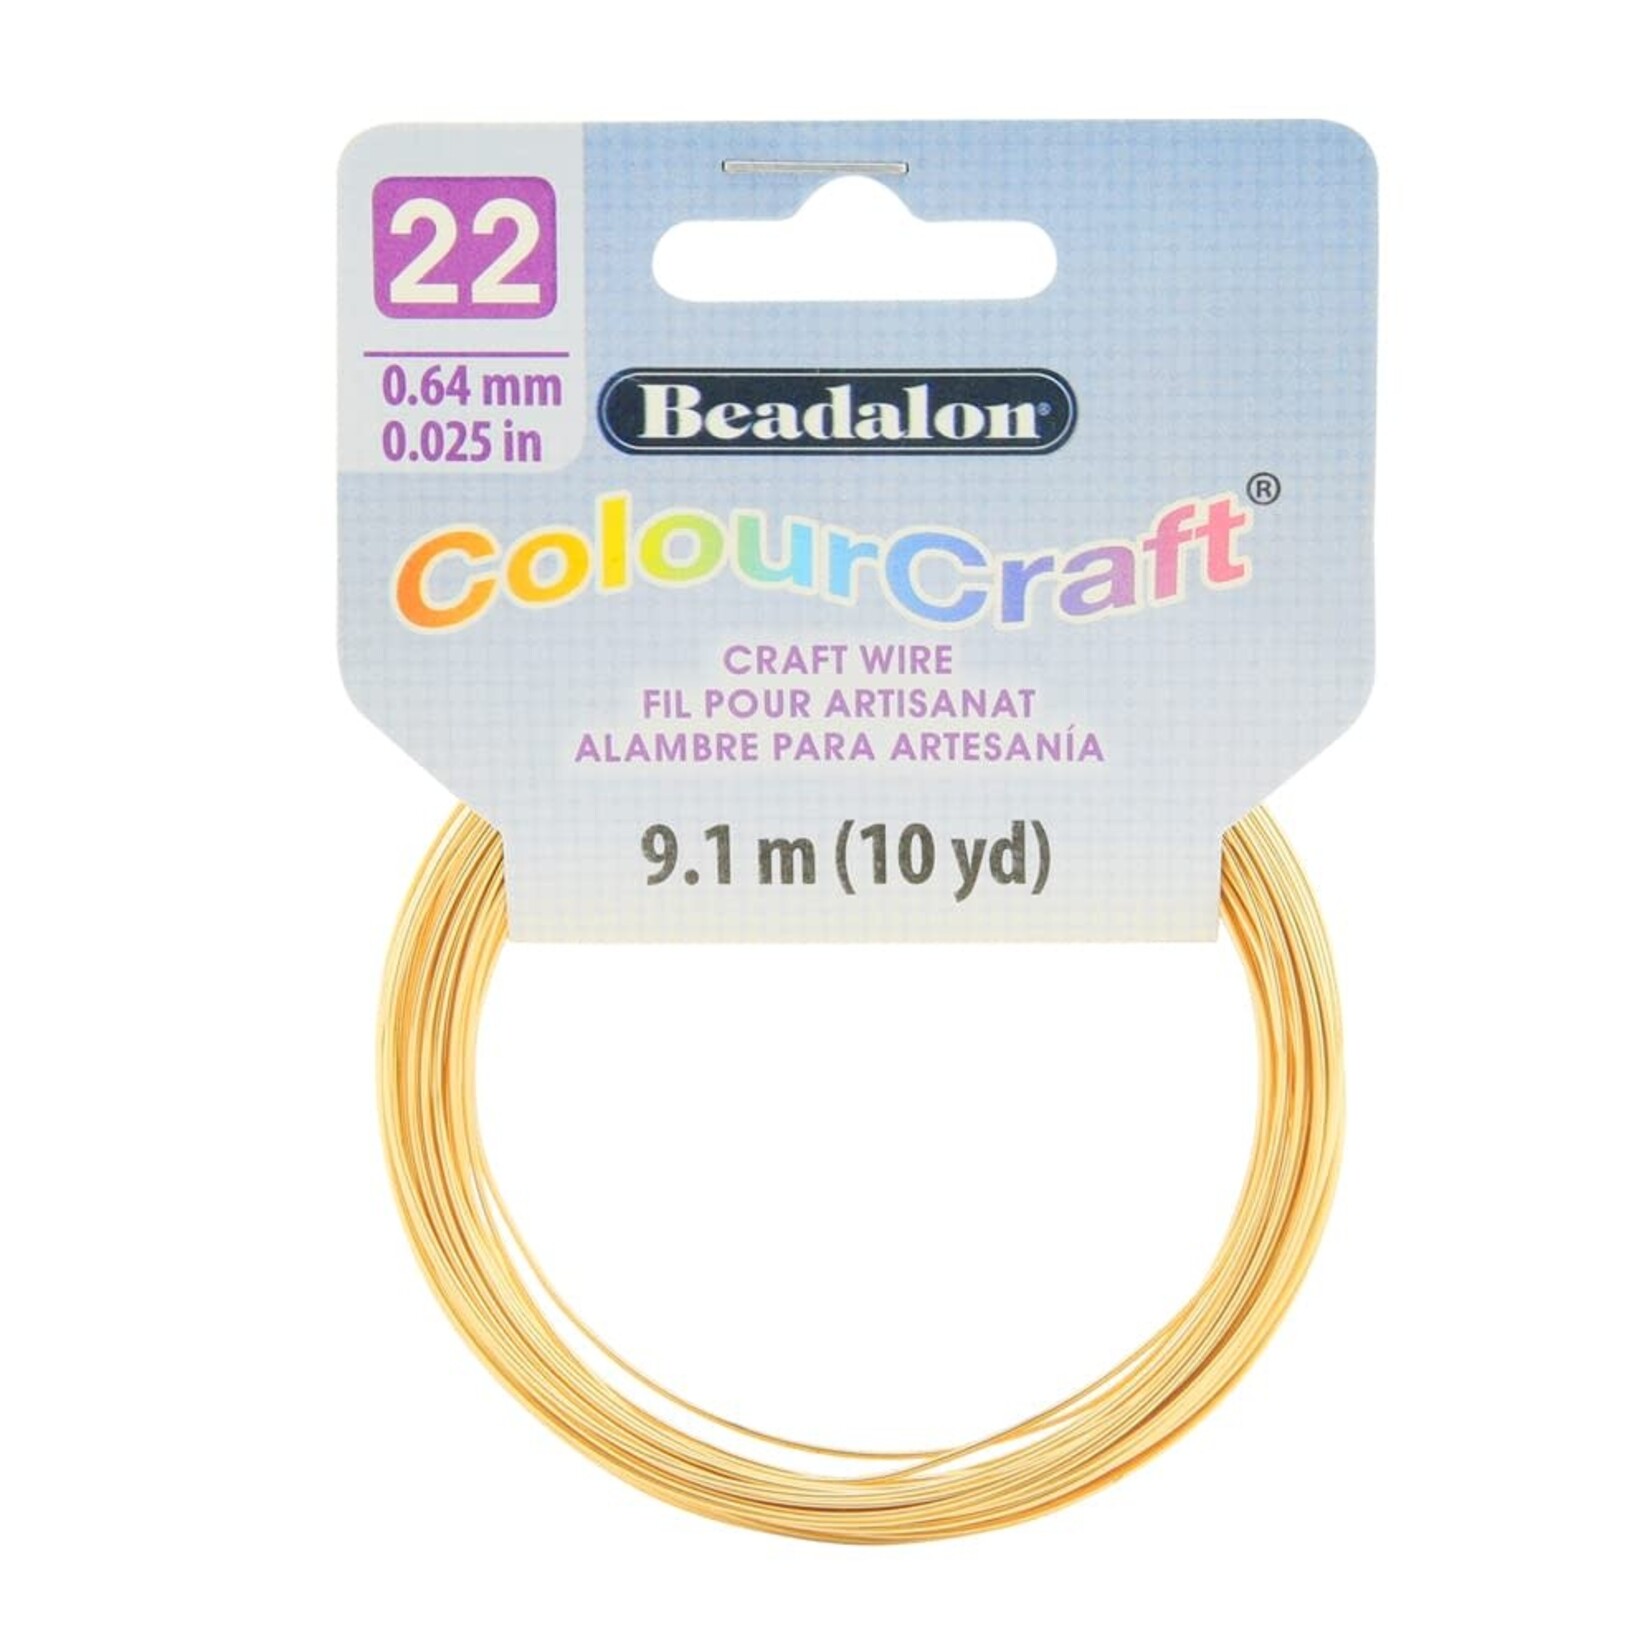 Beadalon ColourCraft Wire, 22 Gauge, Gold Plated Tarnish Resistant, 10 yd Coil